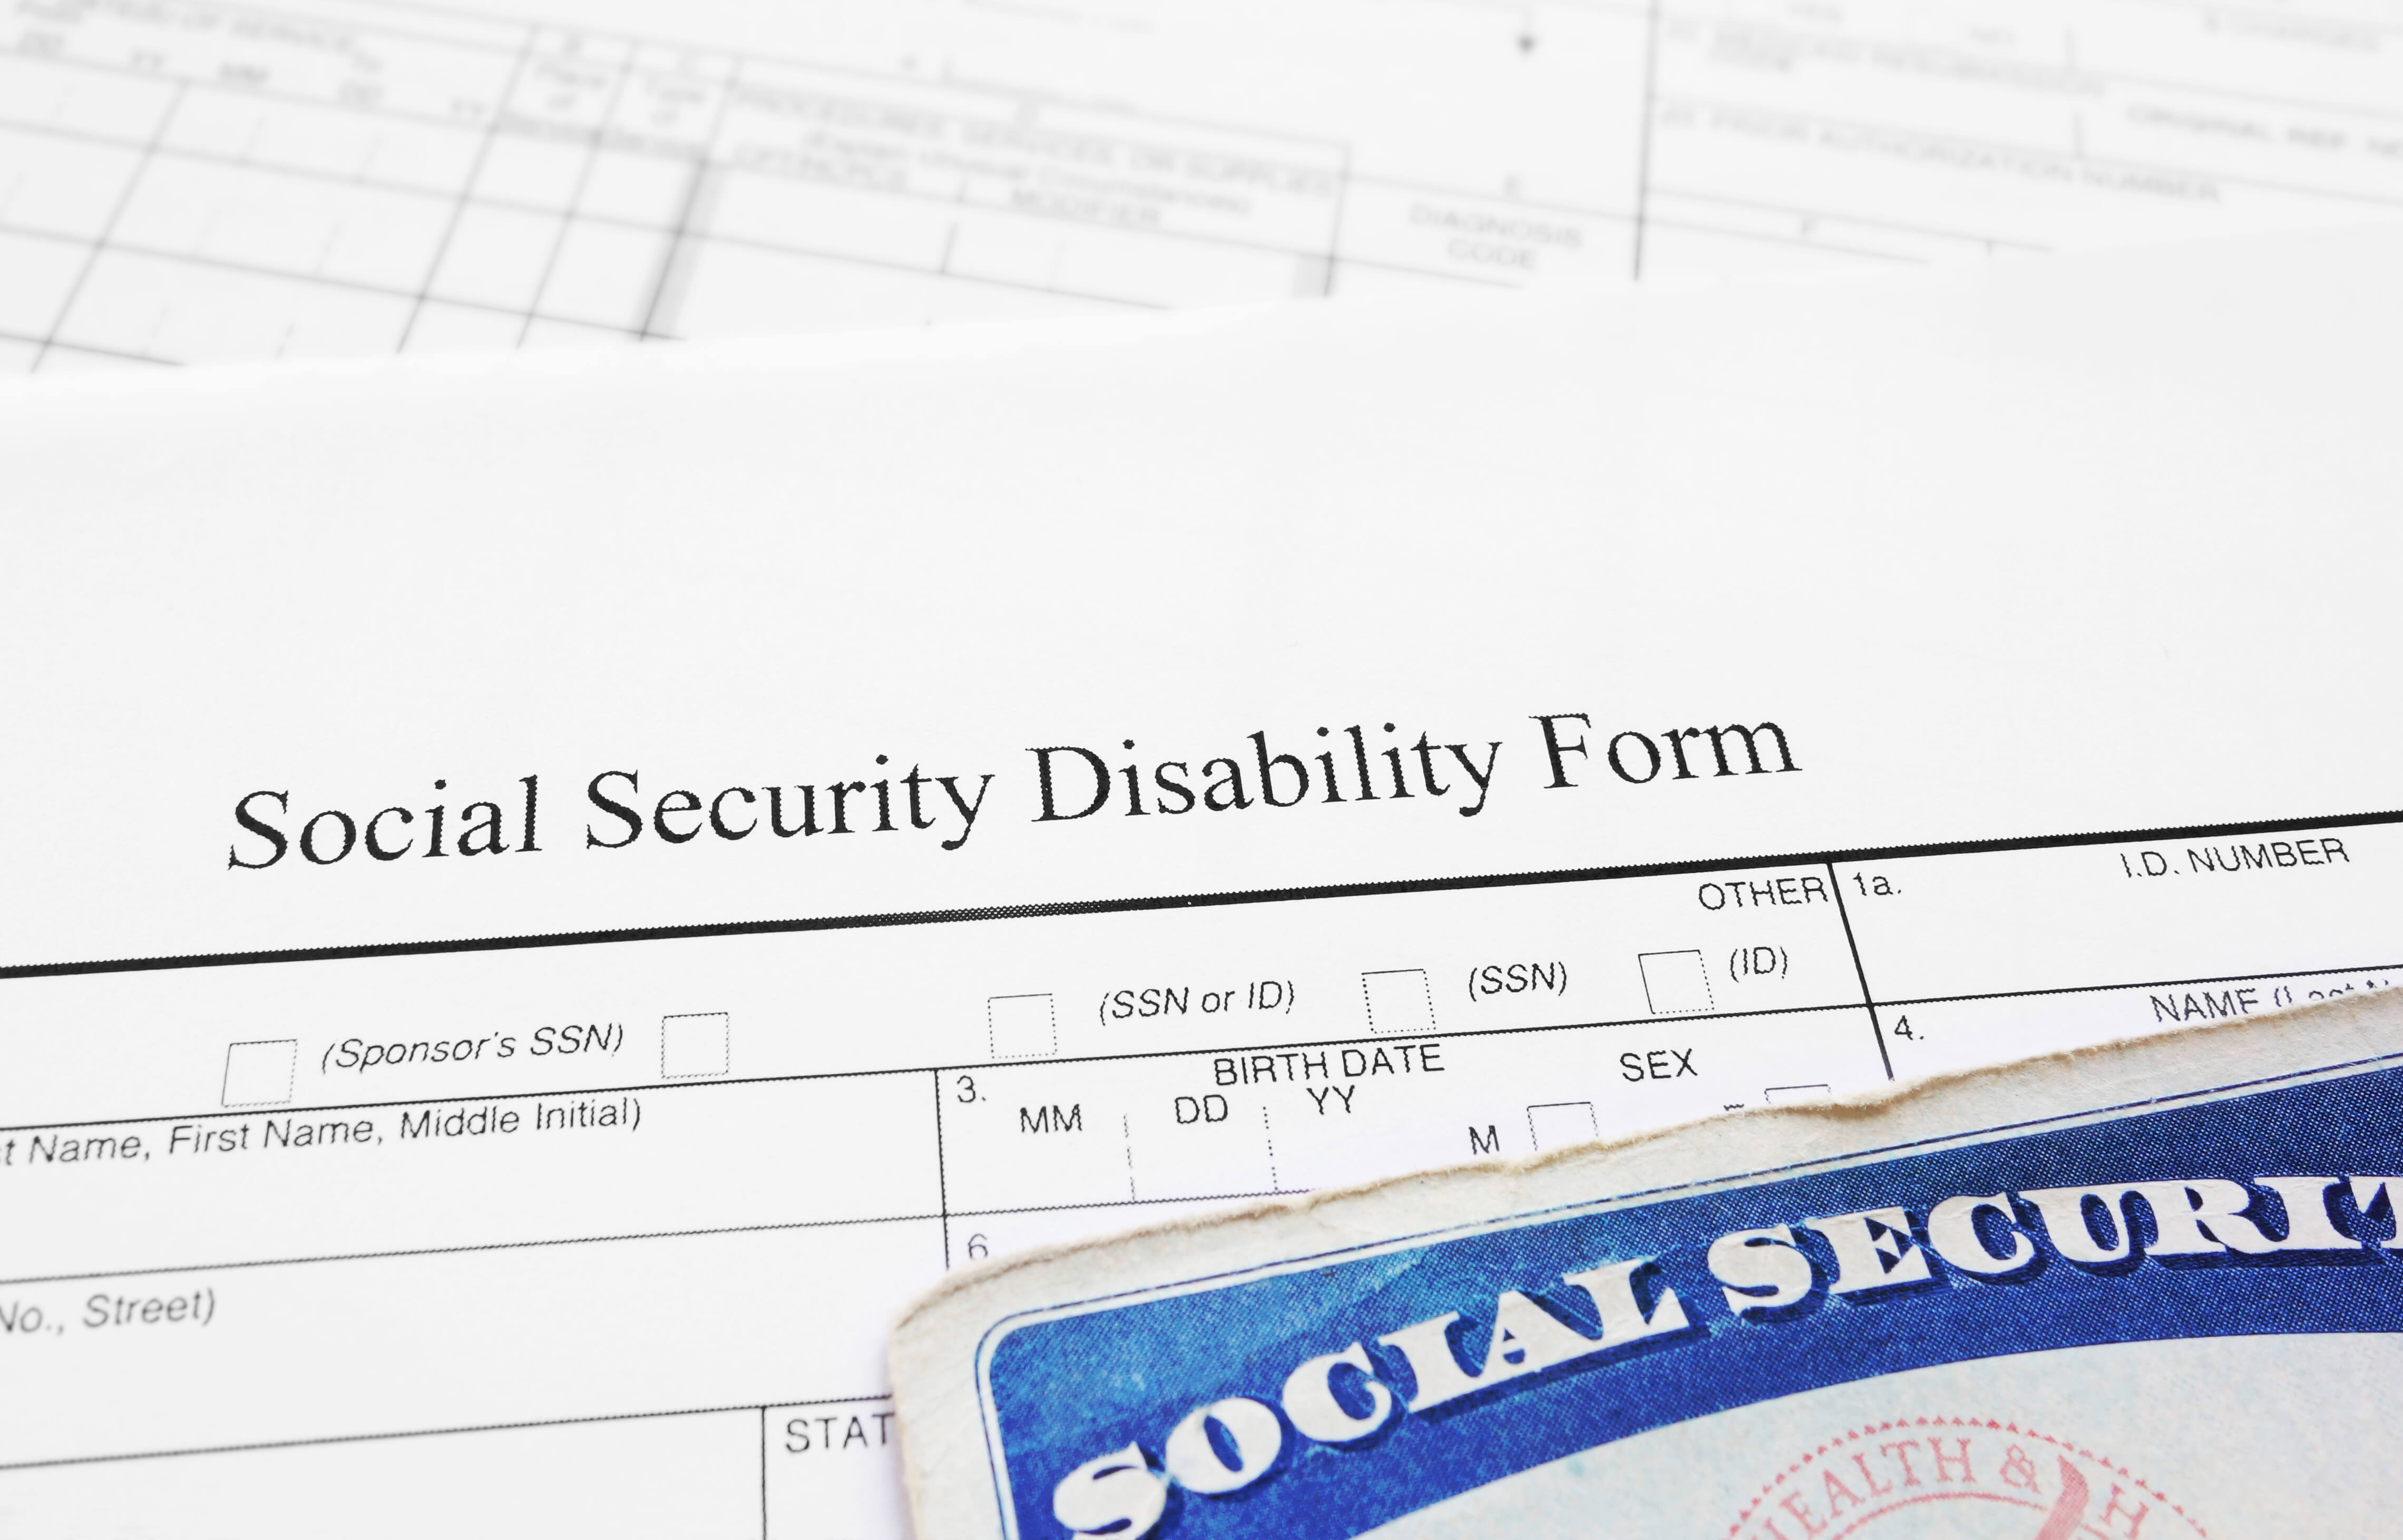 Find out if it's possible to have social security and SSI at the same time